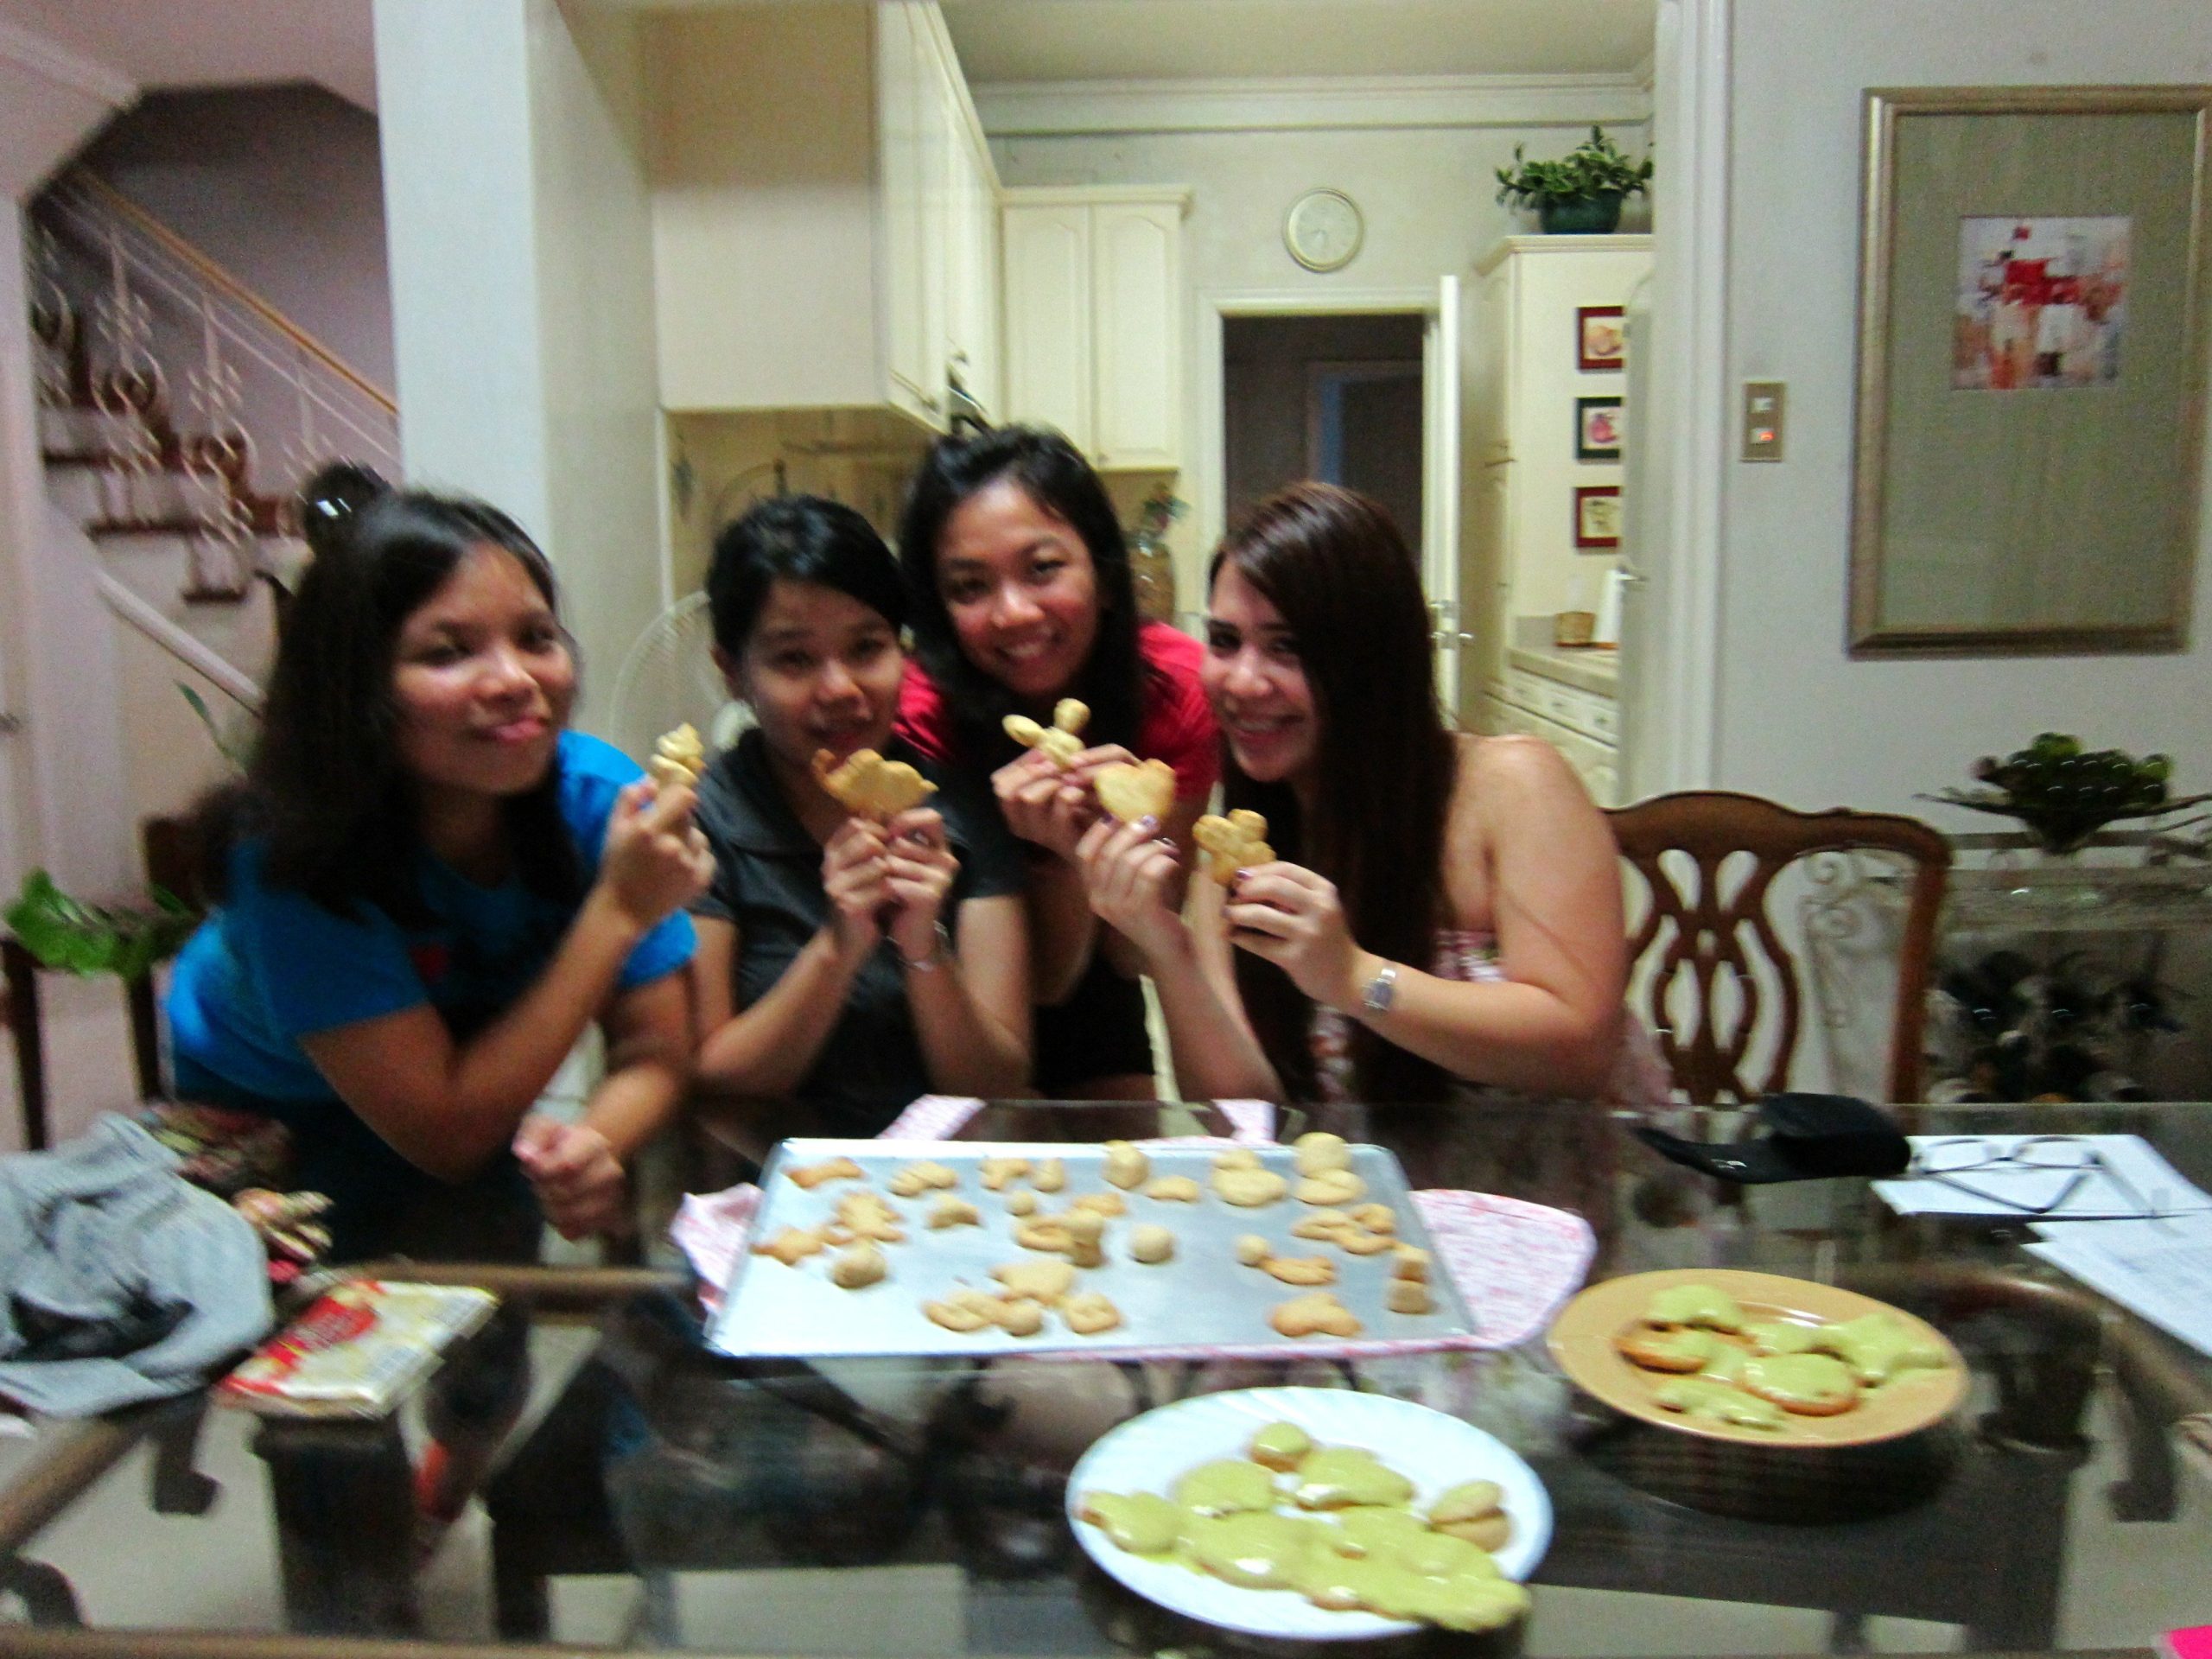 Friends are made more amazing by cookies